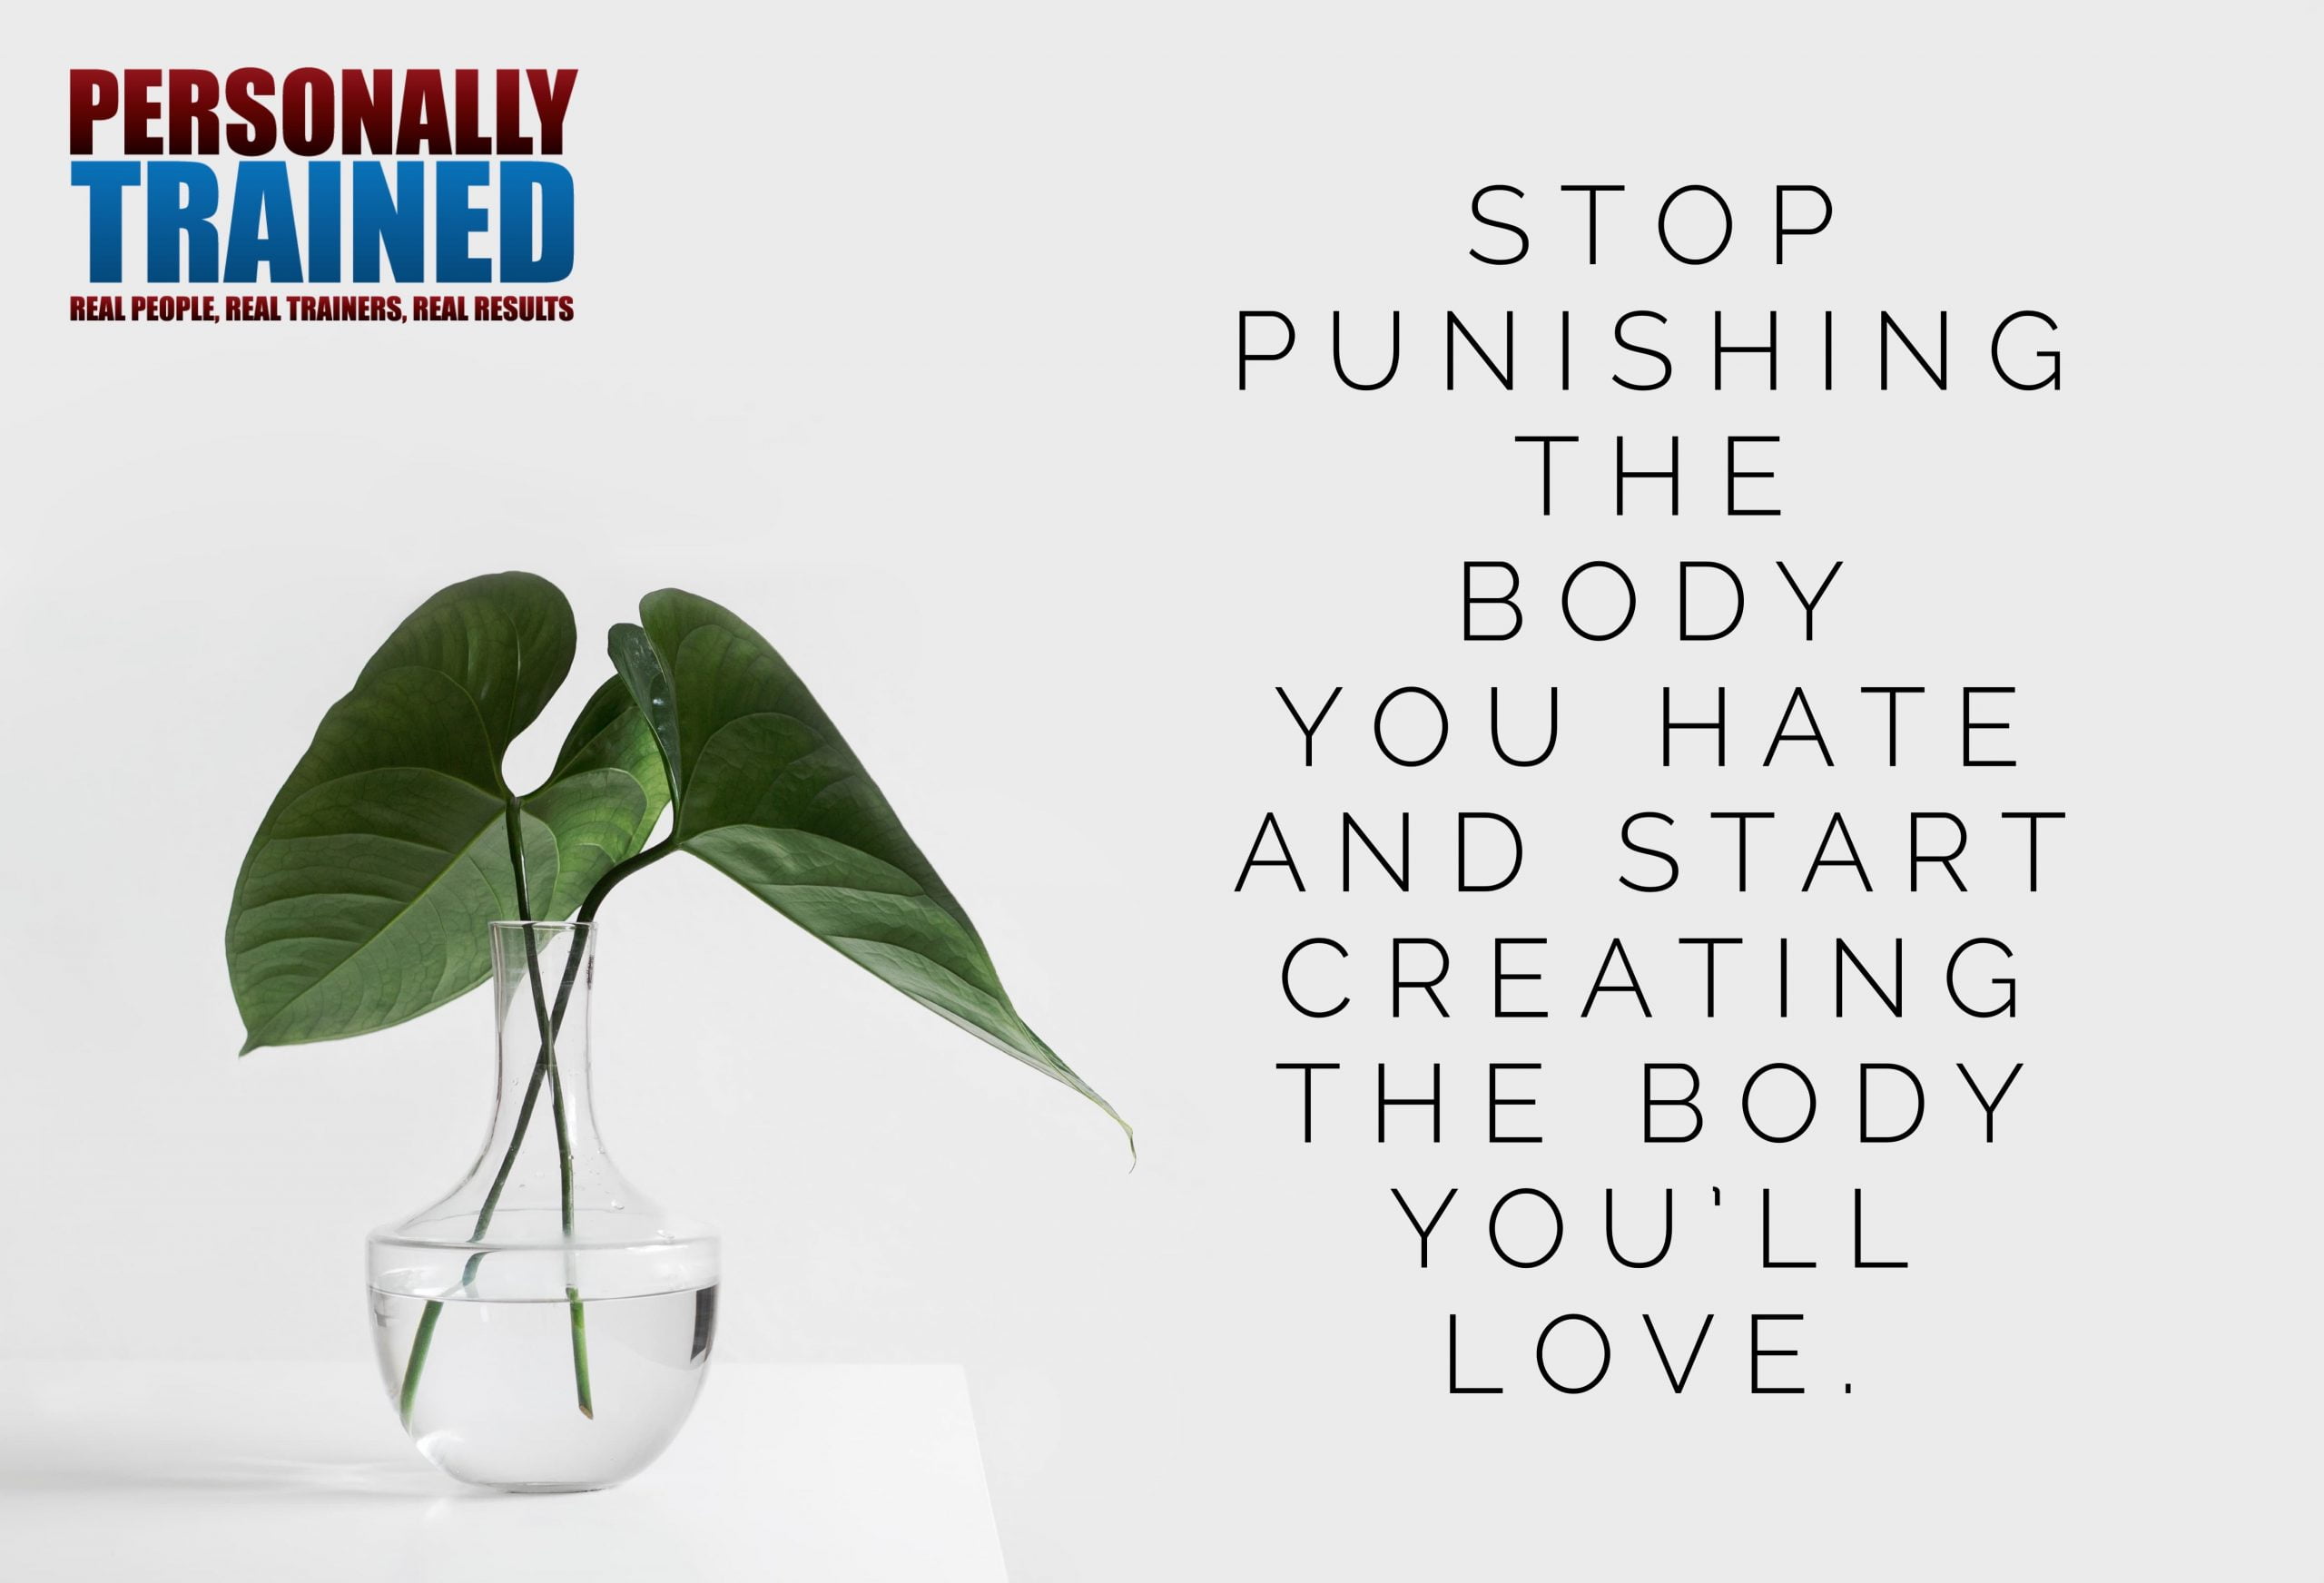 Stop punishing the body you hate and start creating the body you’ll love